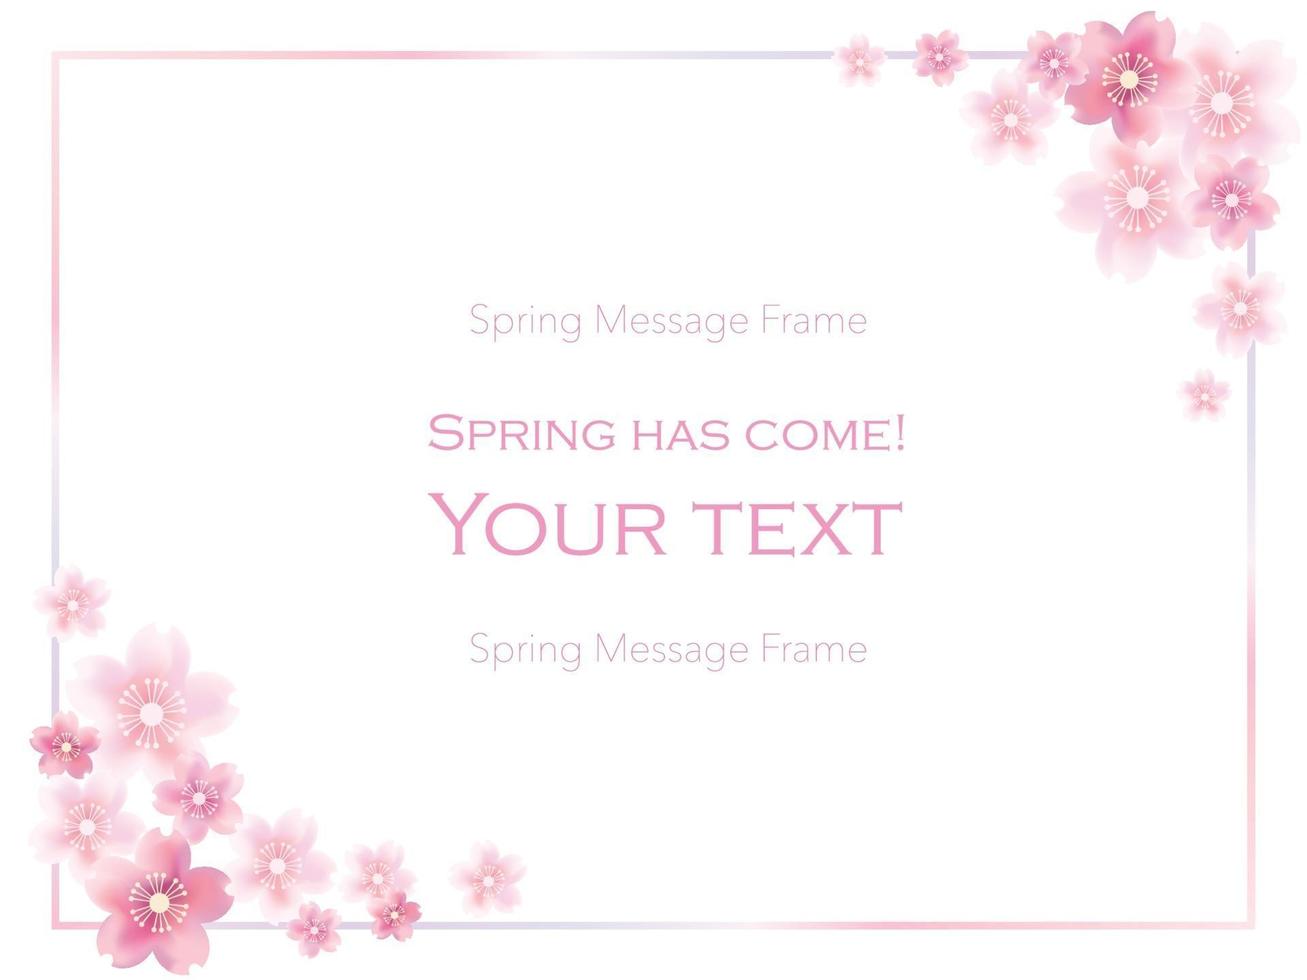 Rectangle Vector Cherry Blossom Frame Isolated On A White Background.